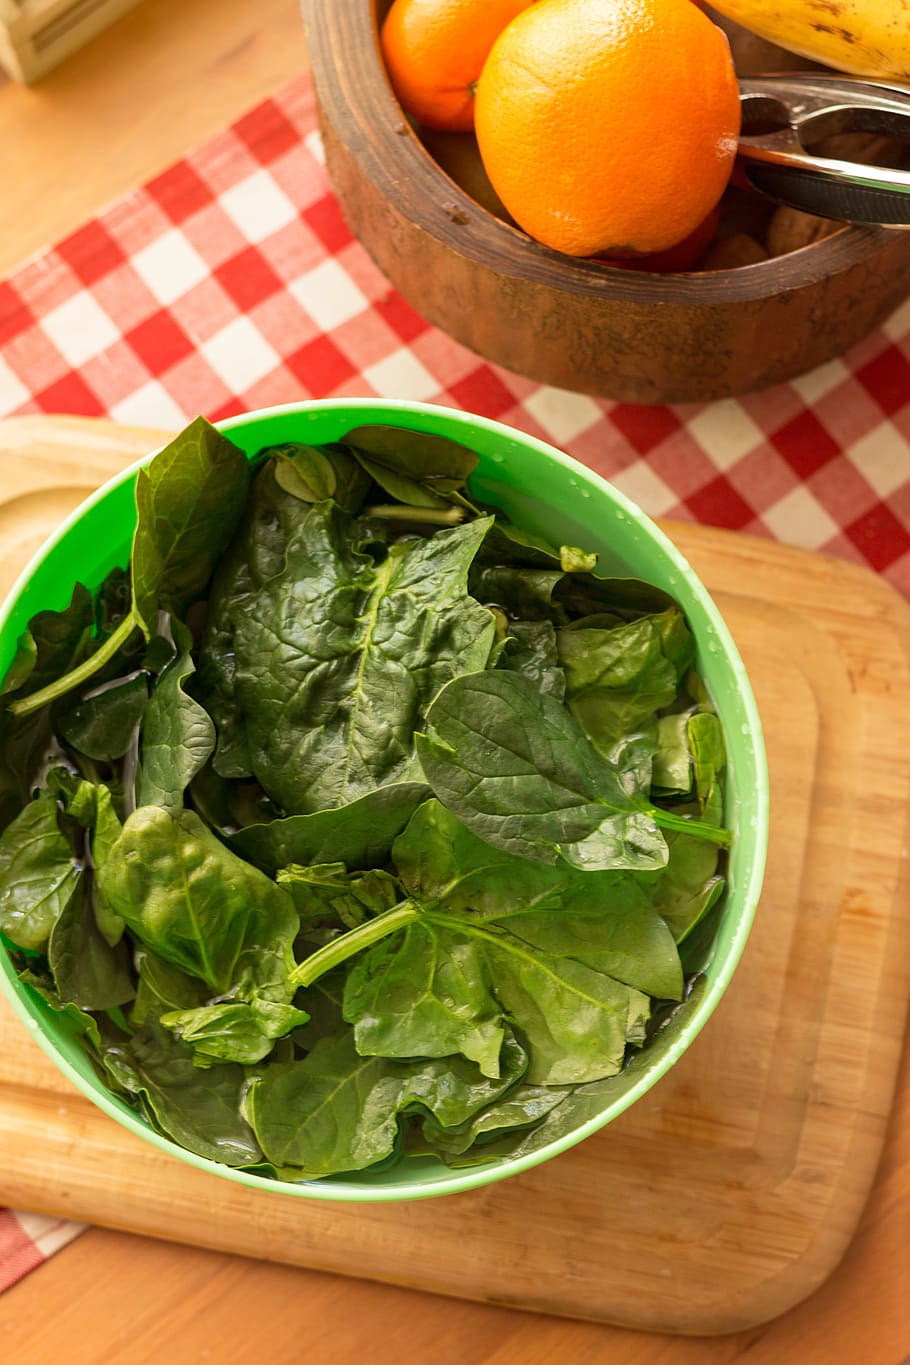 Spinach, Vegetable, Green, Health, vegetable, green, orange, kitchen, table, tablecloth, cover